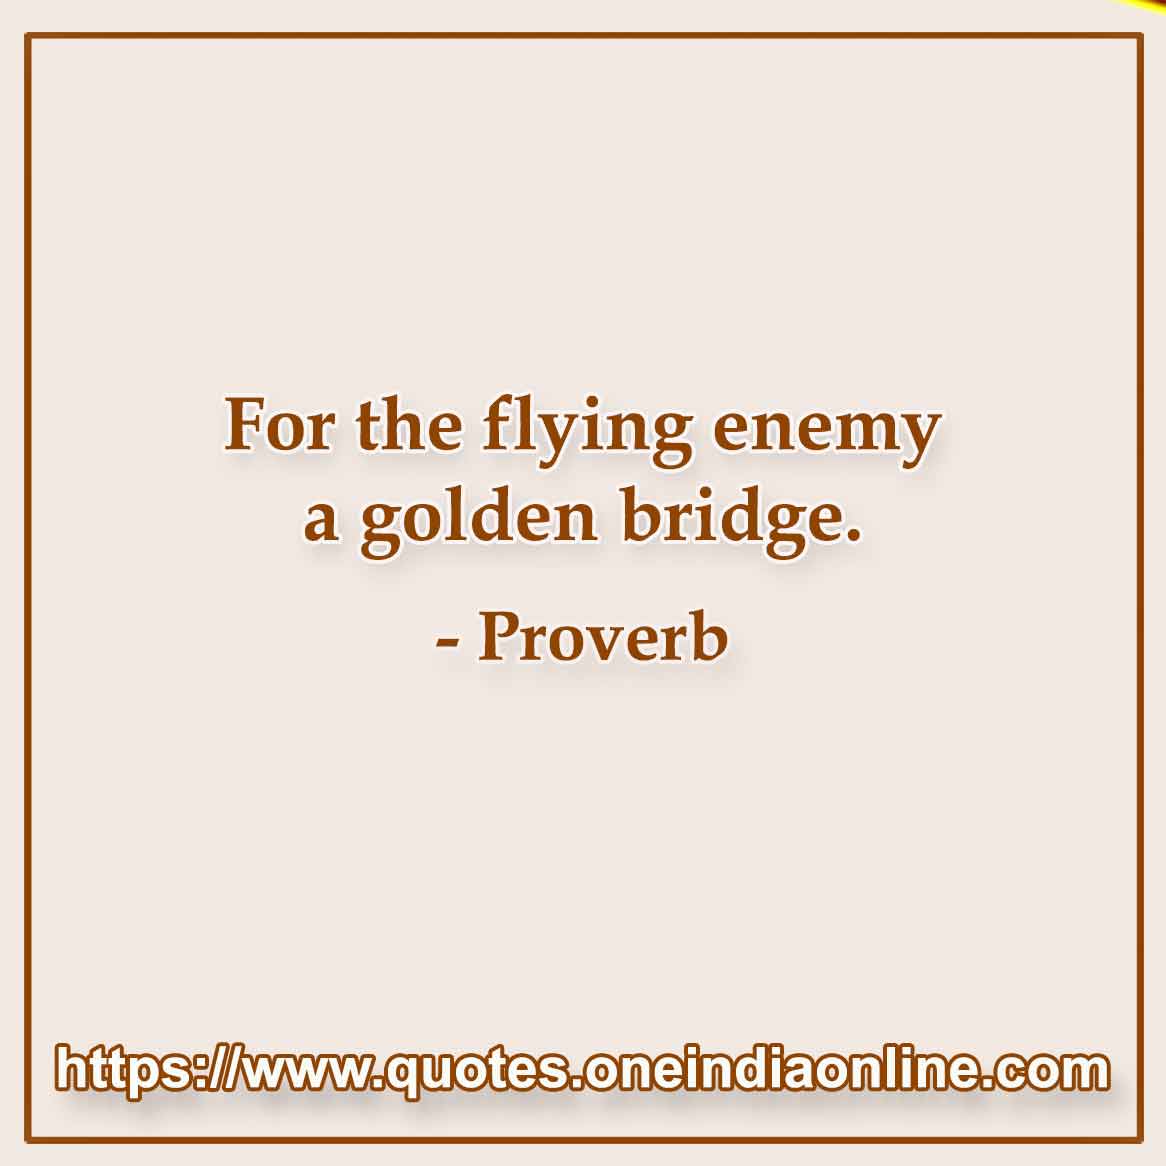 For the flying enemy a golden bridge.

Italian Proverbs